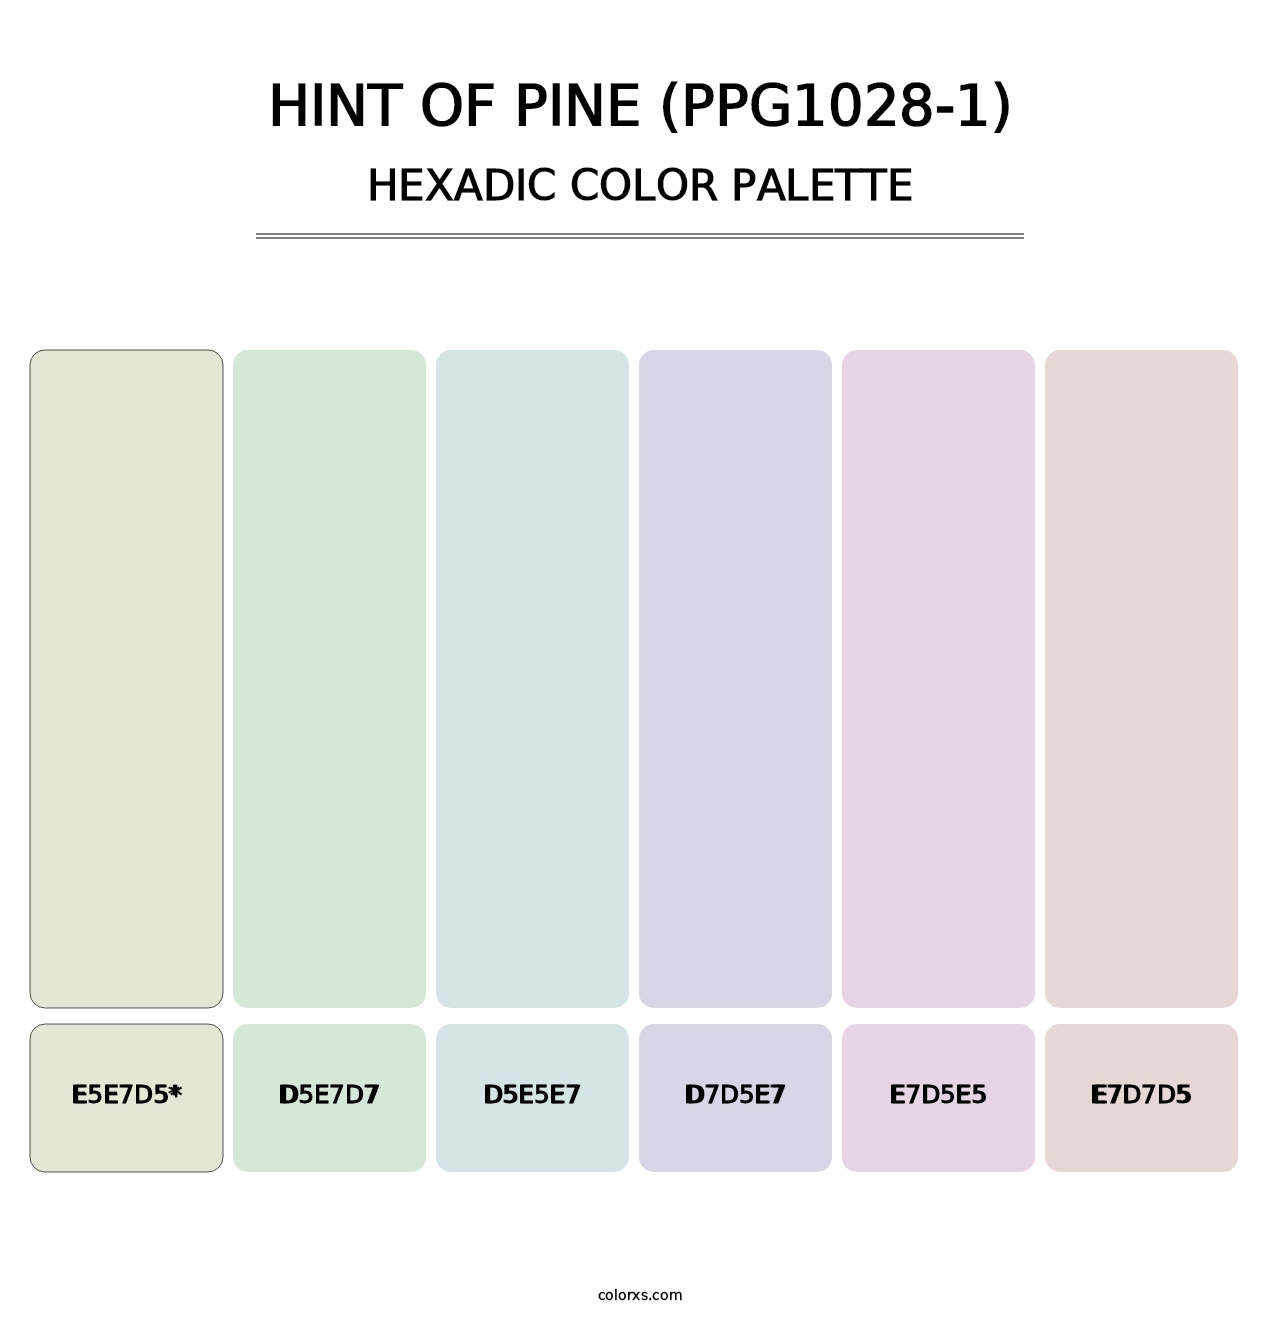 Hint Of Pine (PPG1028-1) - Hexadic Color Palette